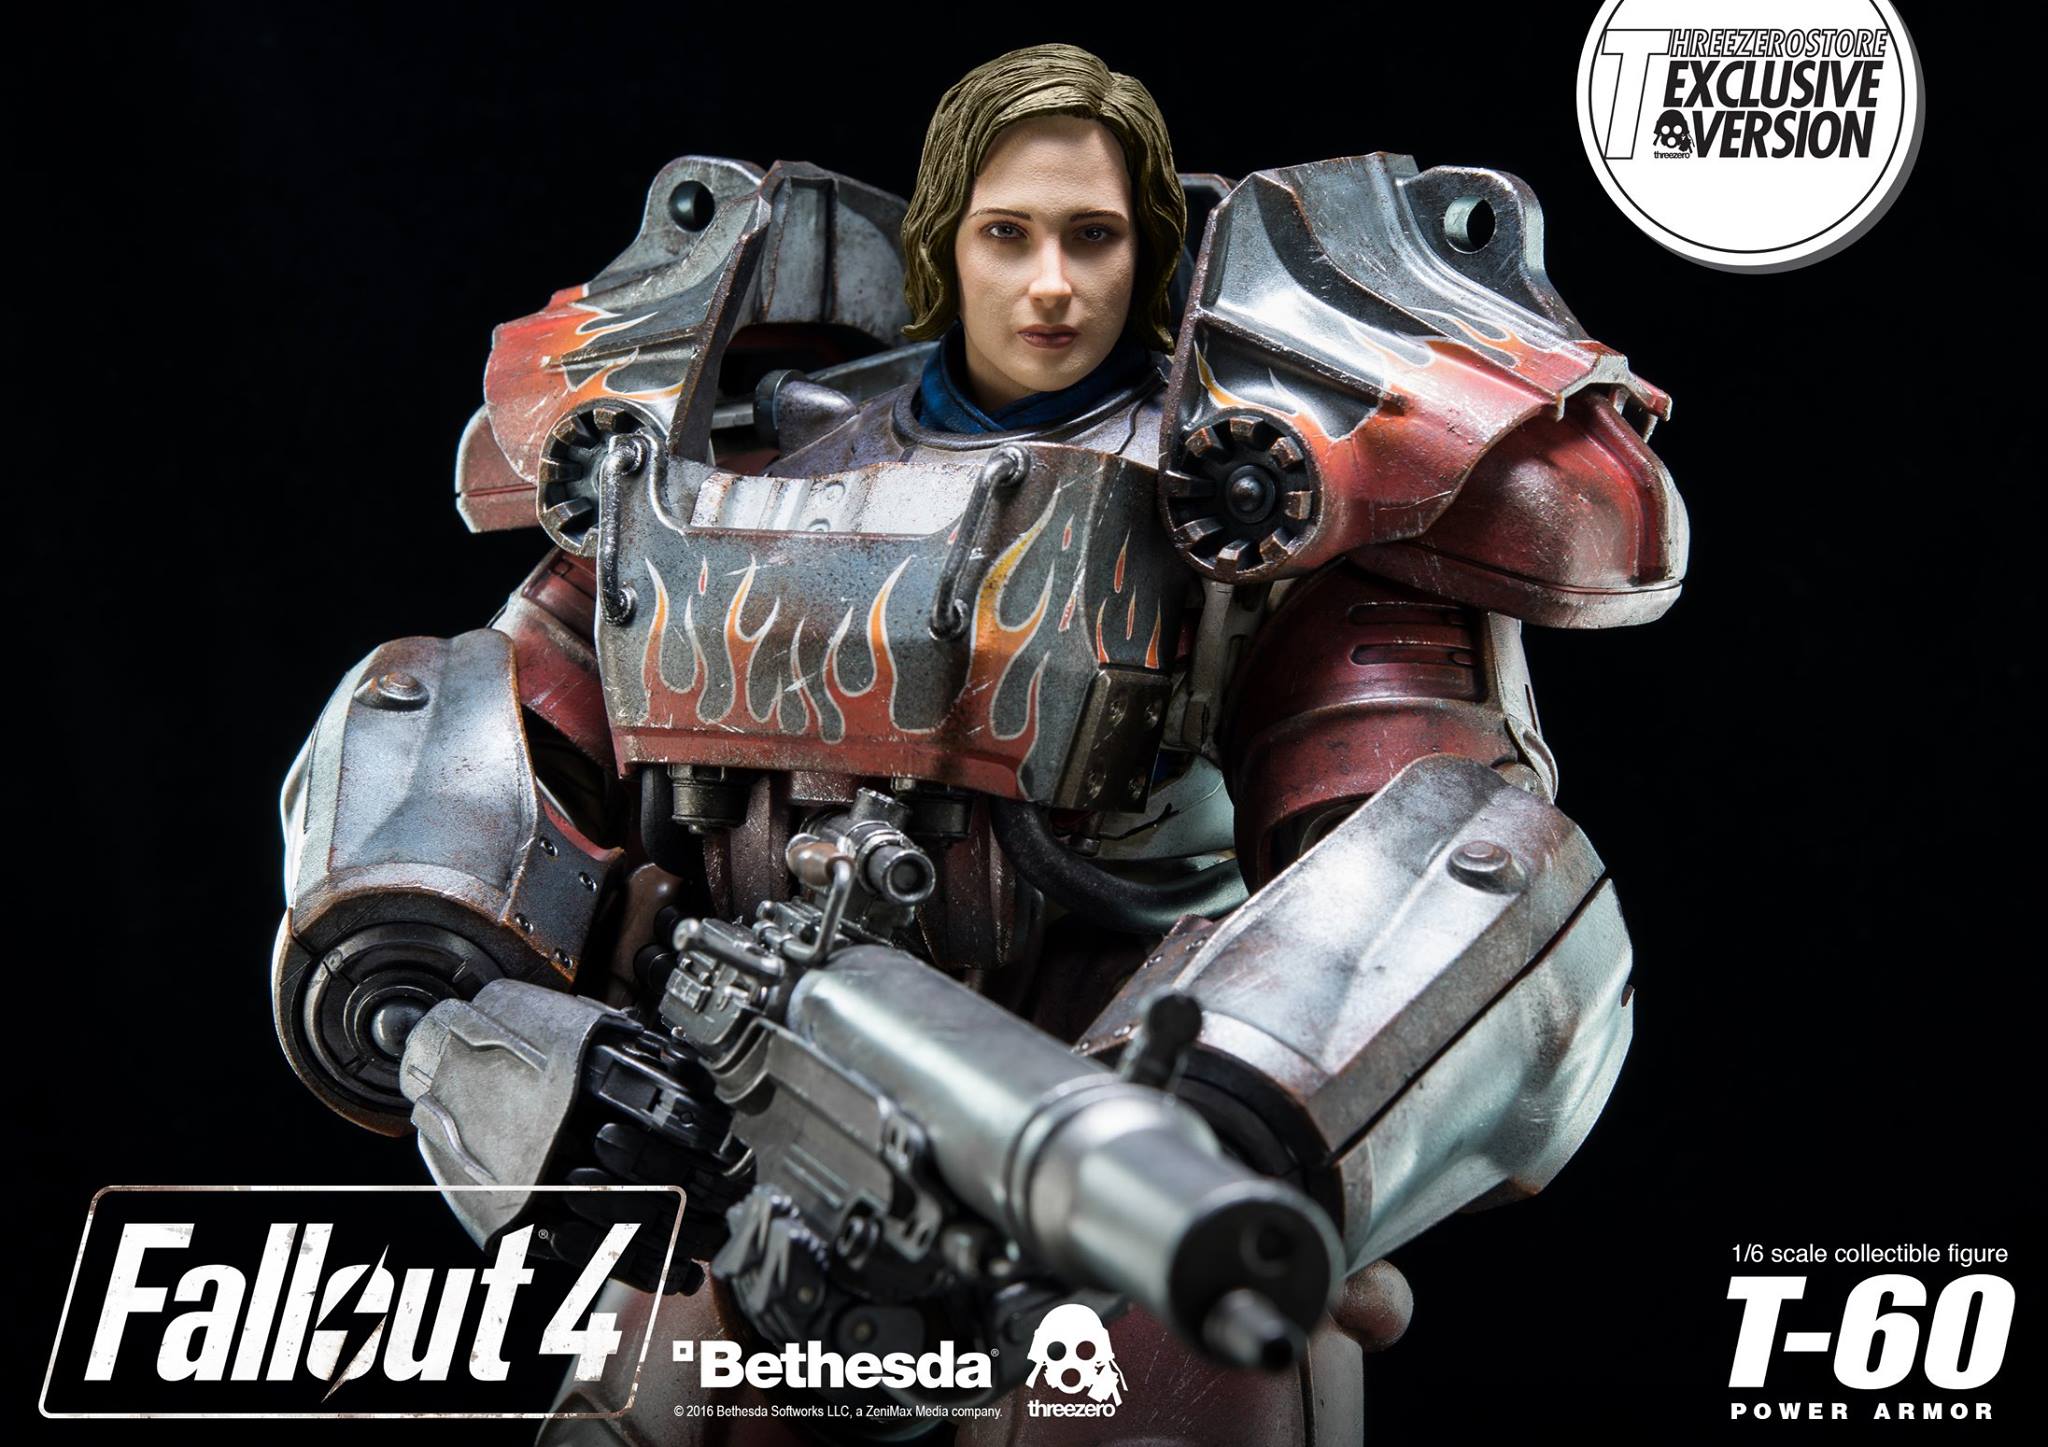 Look At This $398 Fallout 4 Figure